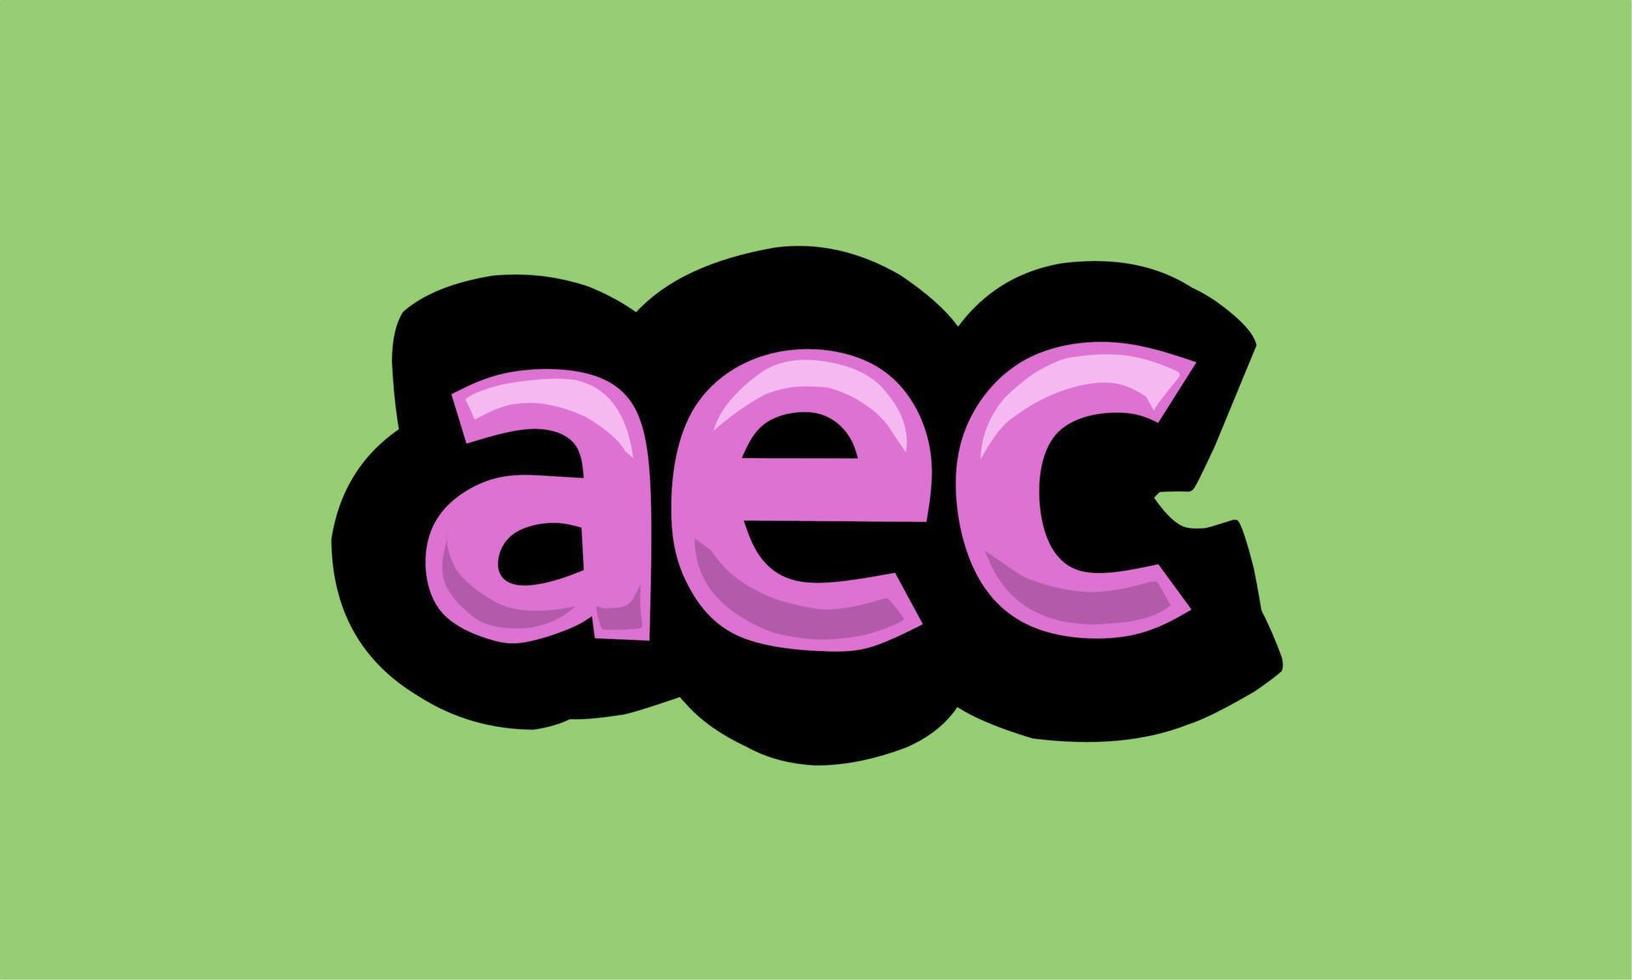 AEC writing vector design on a green background